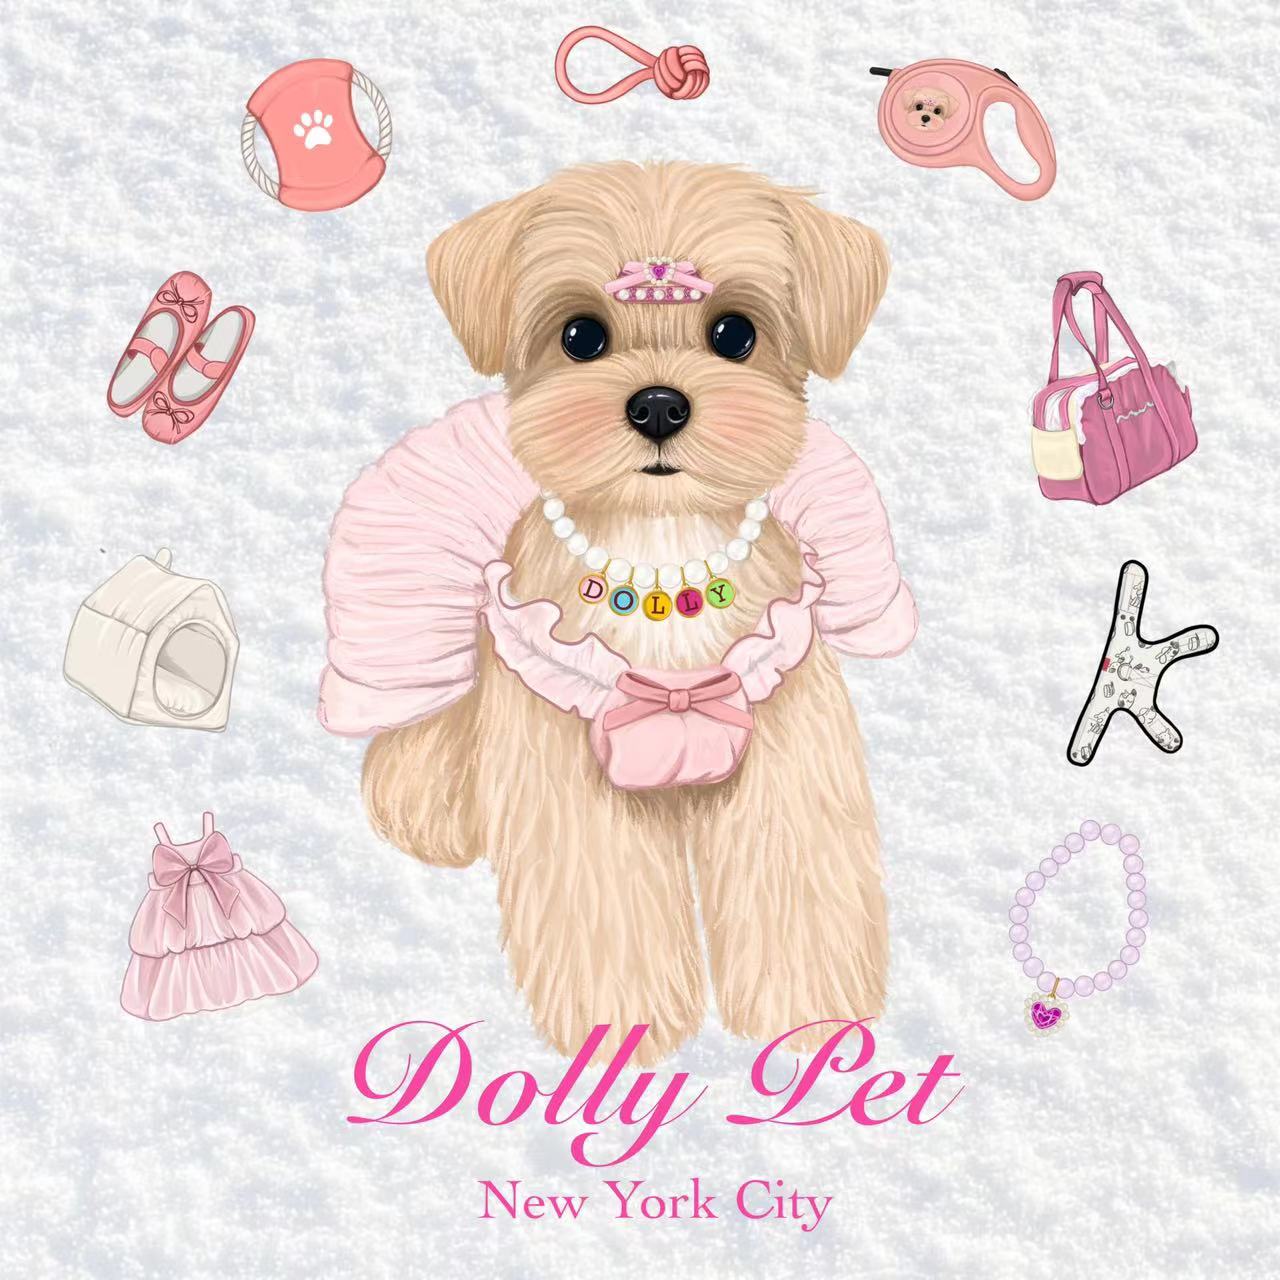 Dolly pet gift card